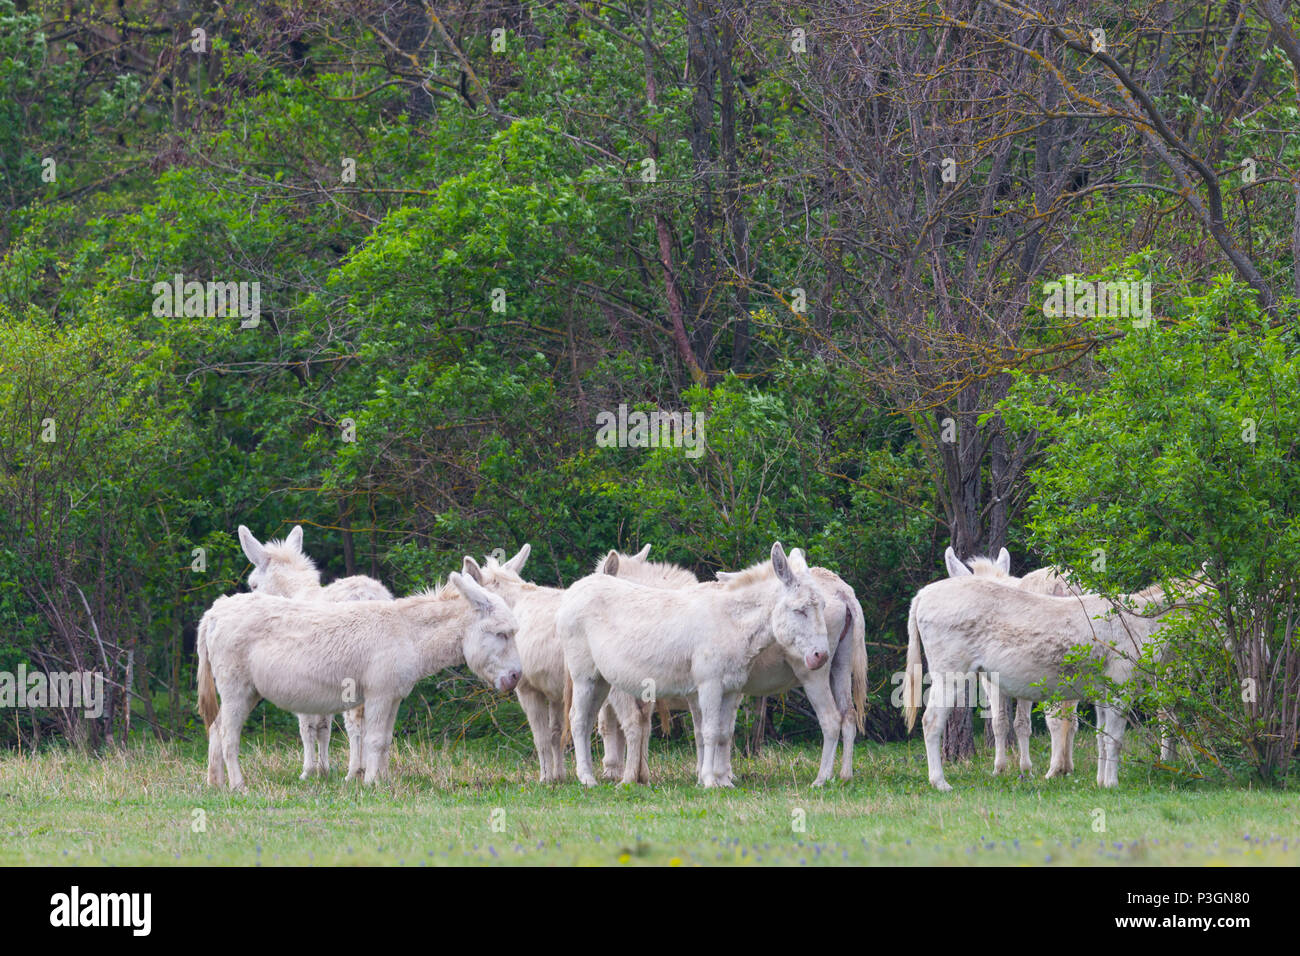 natural white donkeys standing in meadow Stock Photo